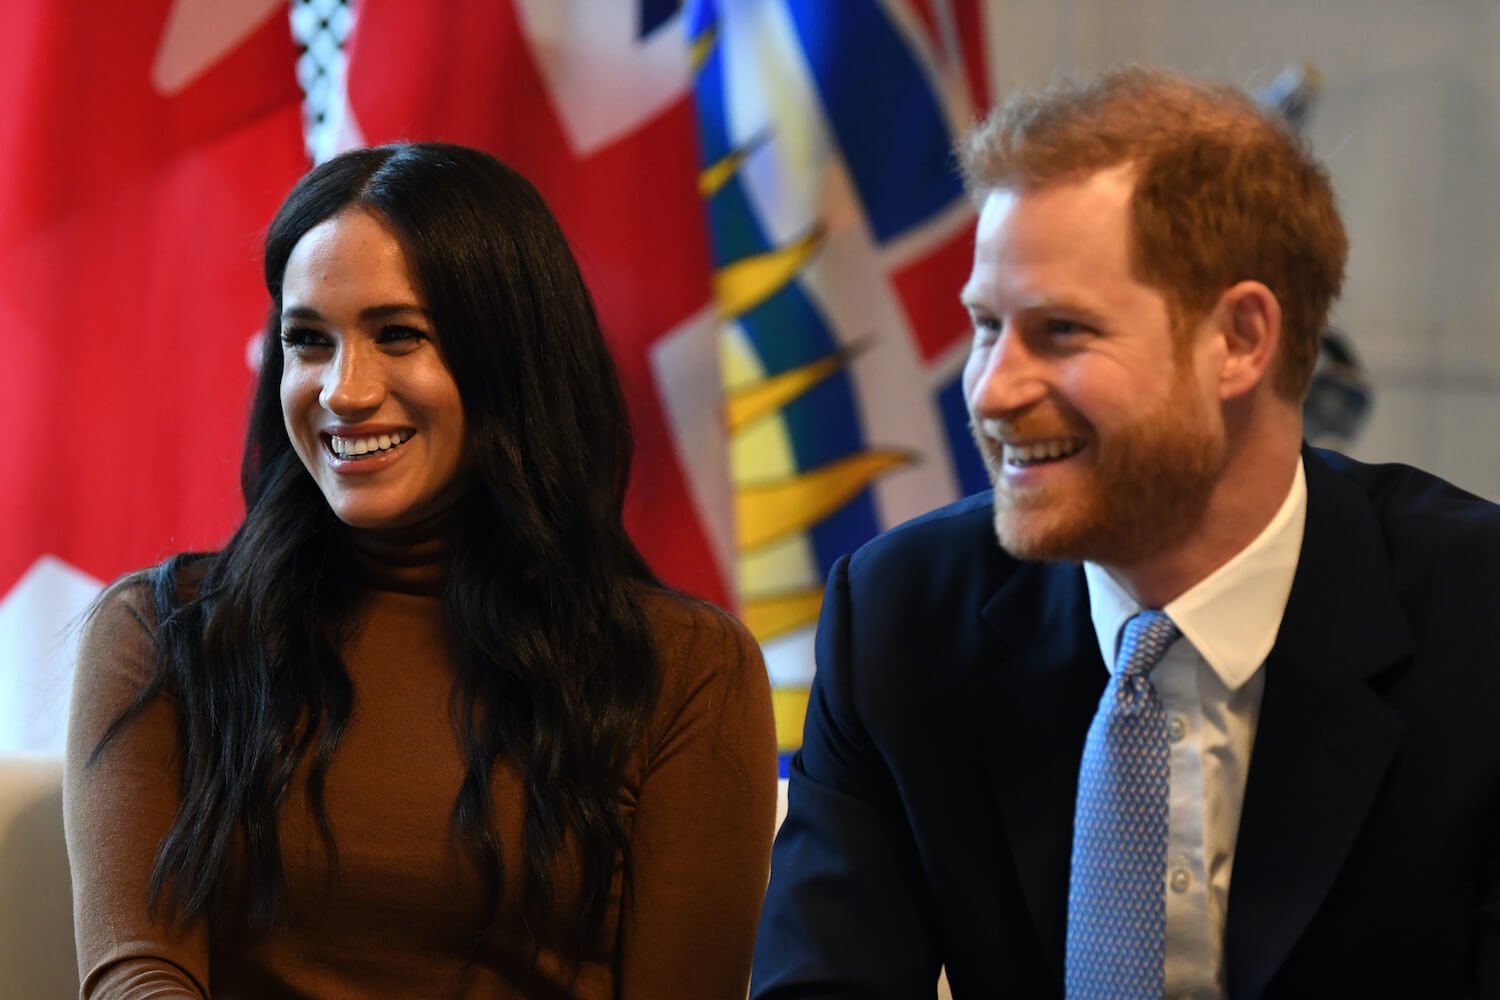 Meghan Markle smiles wearing a brown shirt while seated next to smiling Prince Harry wearing suit and tie